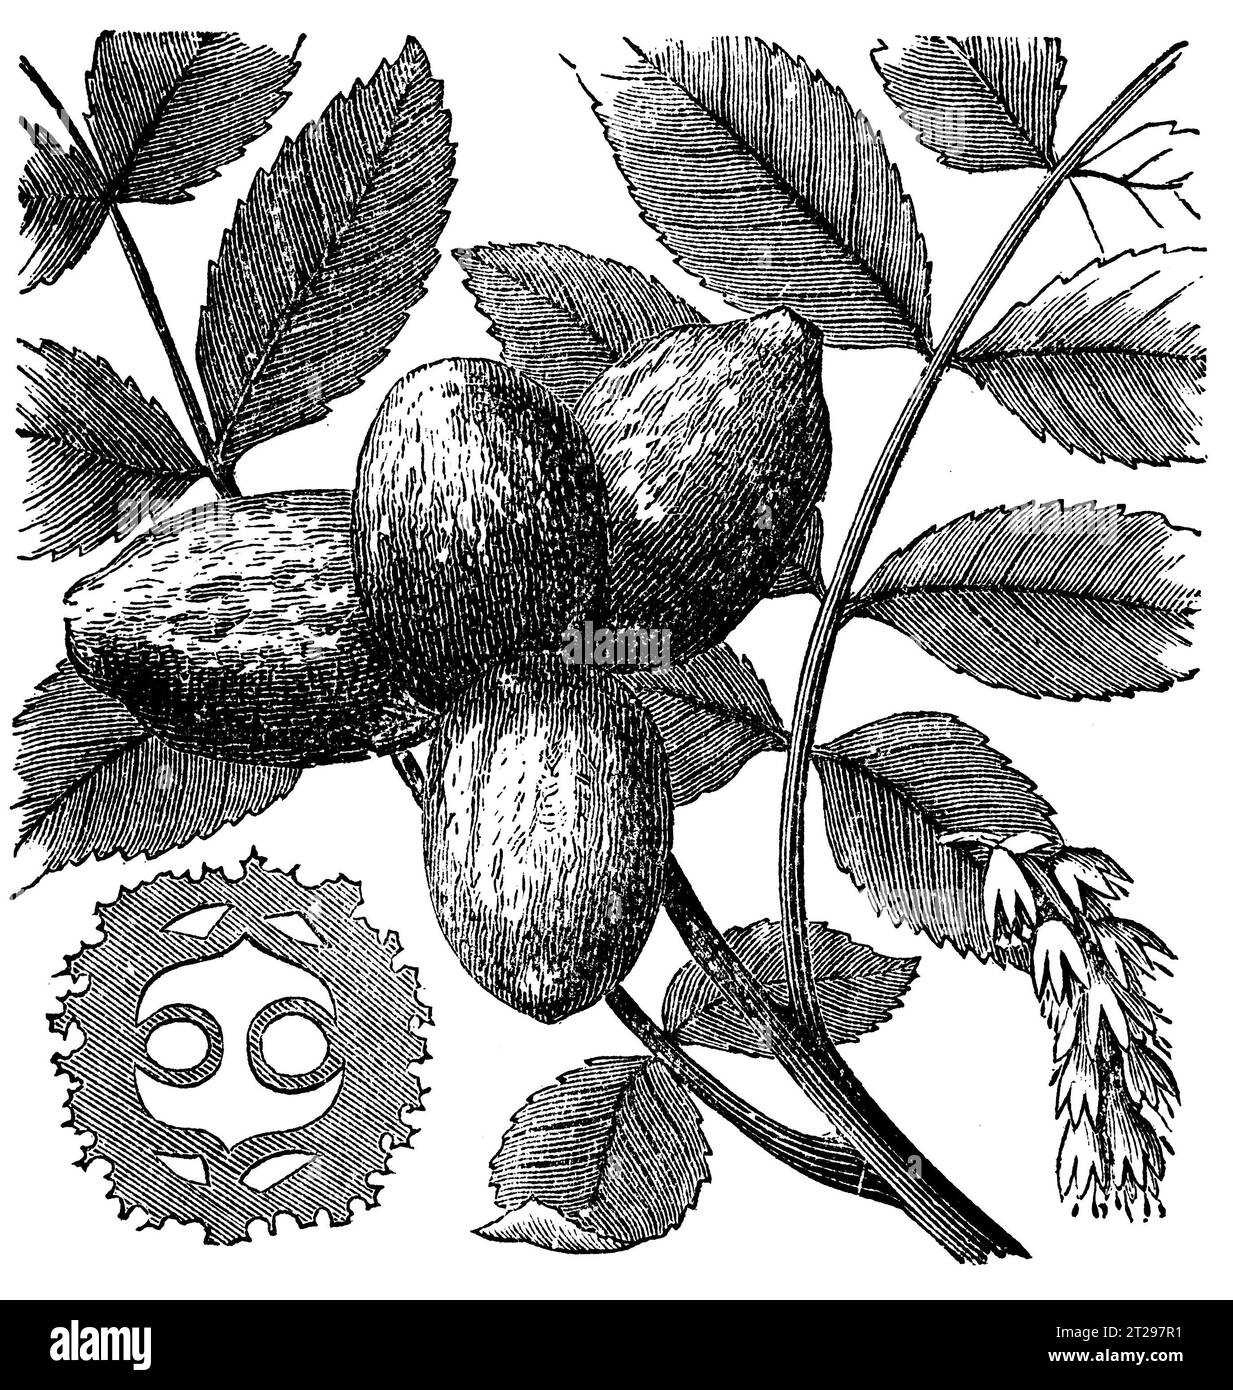 Juglans, cinerea, digitally restored illustration from 'The Condensed American Encyclopedia', published in the 19th century. Stock Photo